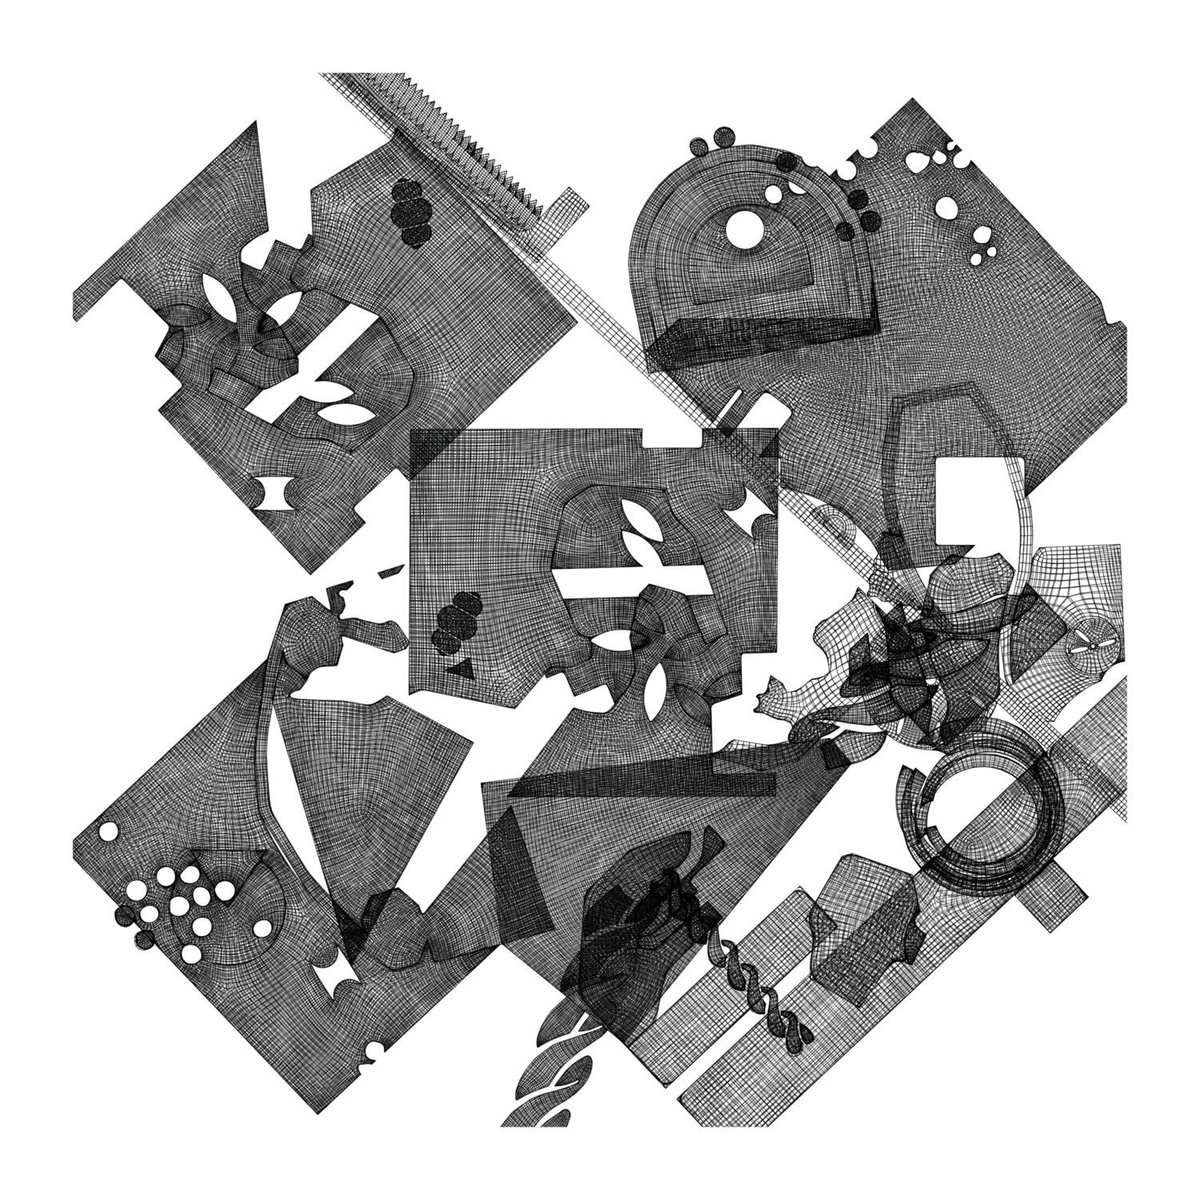 Gm 🤍 You love art and architecture? You love history? And you love technology? Piranesi. Fields of chain. Independent generative architectural project that is an amalgamation of history art and technology. 0.0399 $ETH 1669 unique random fields of urban landscape Based on…